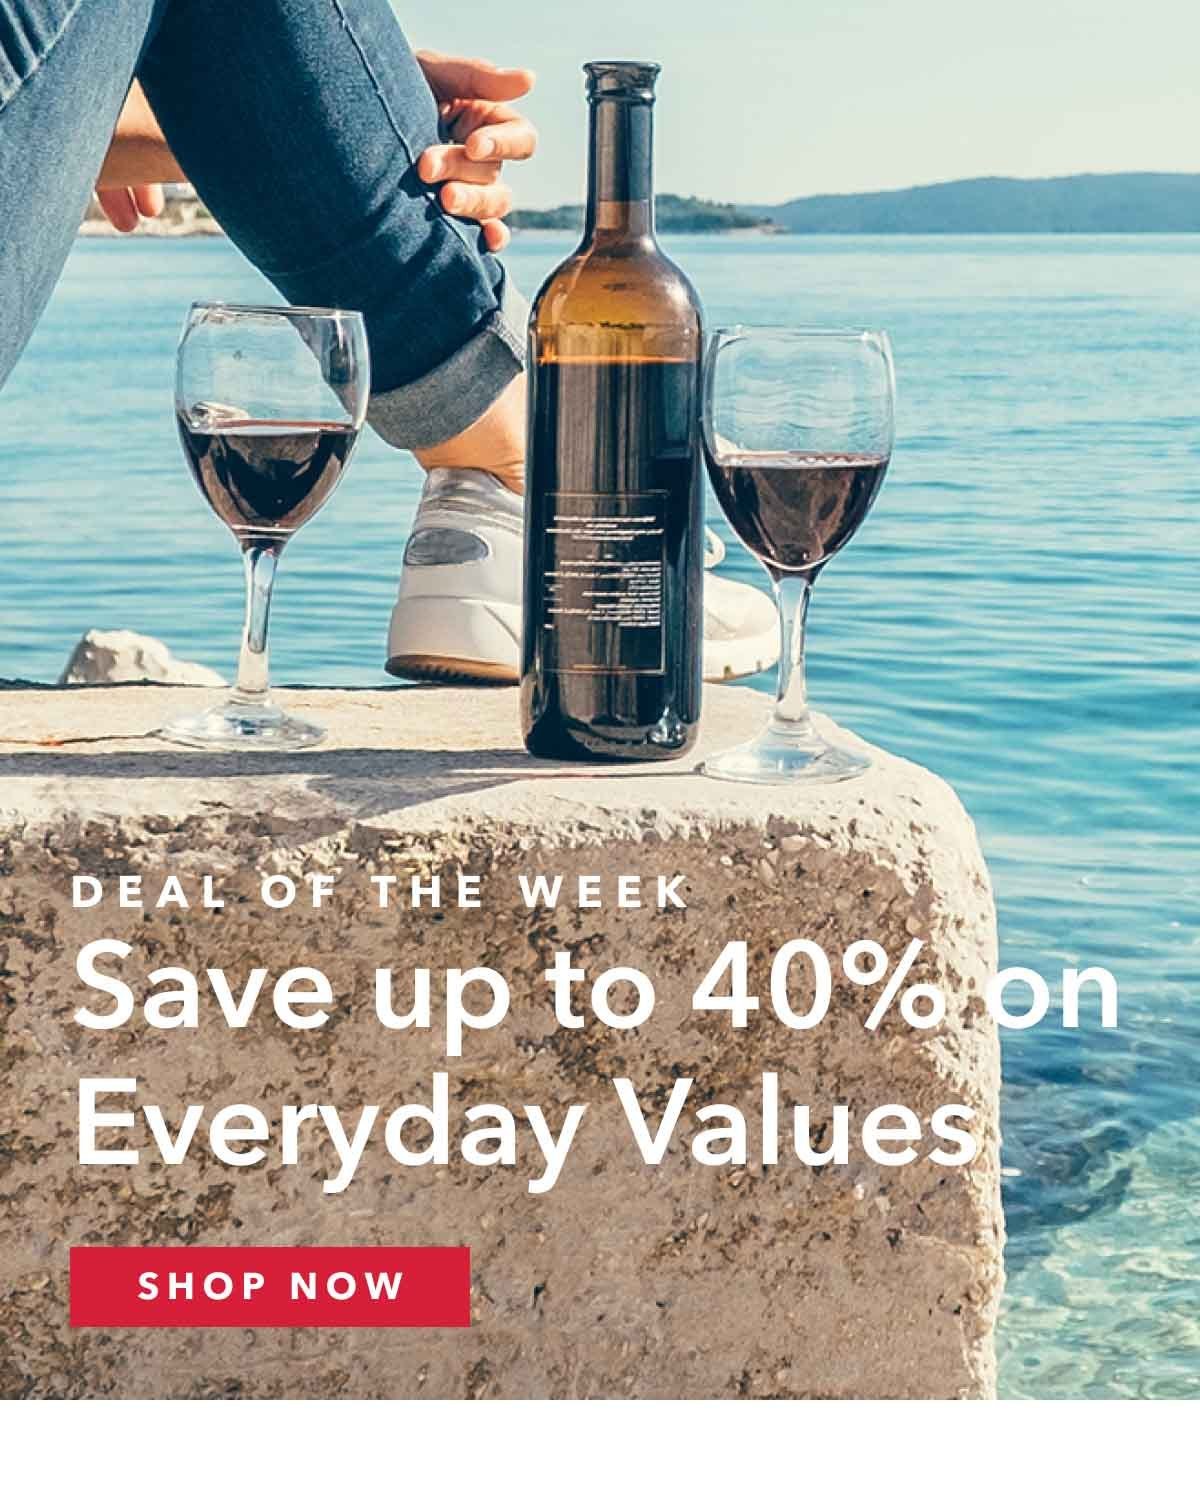 Deal of the week - save up to 40% on everyday values